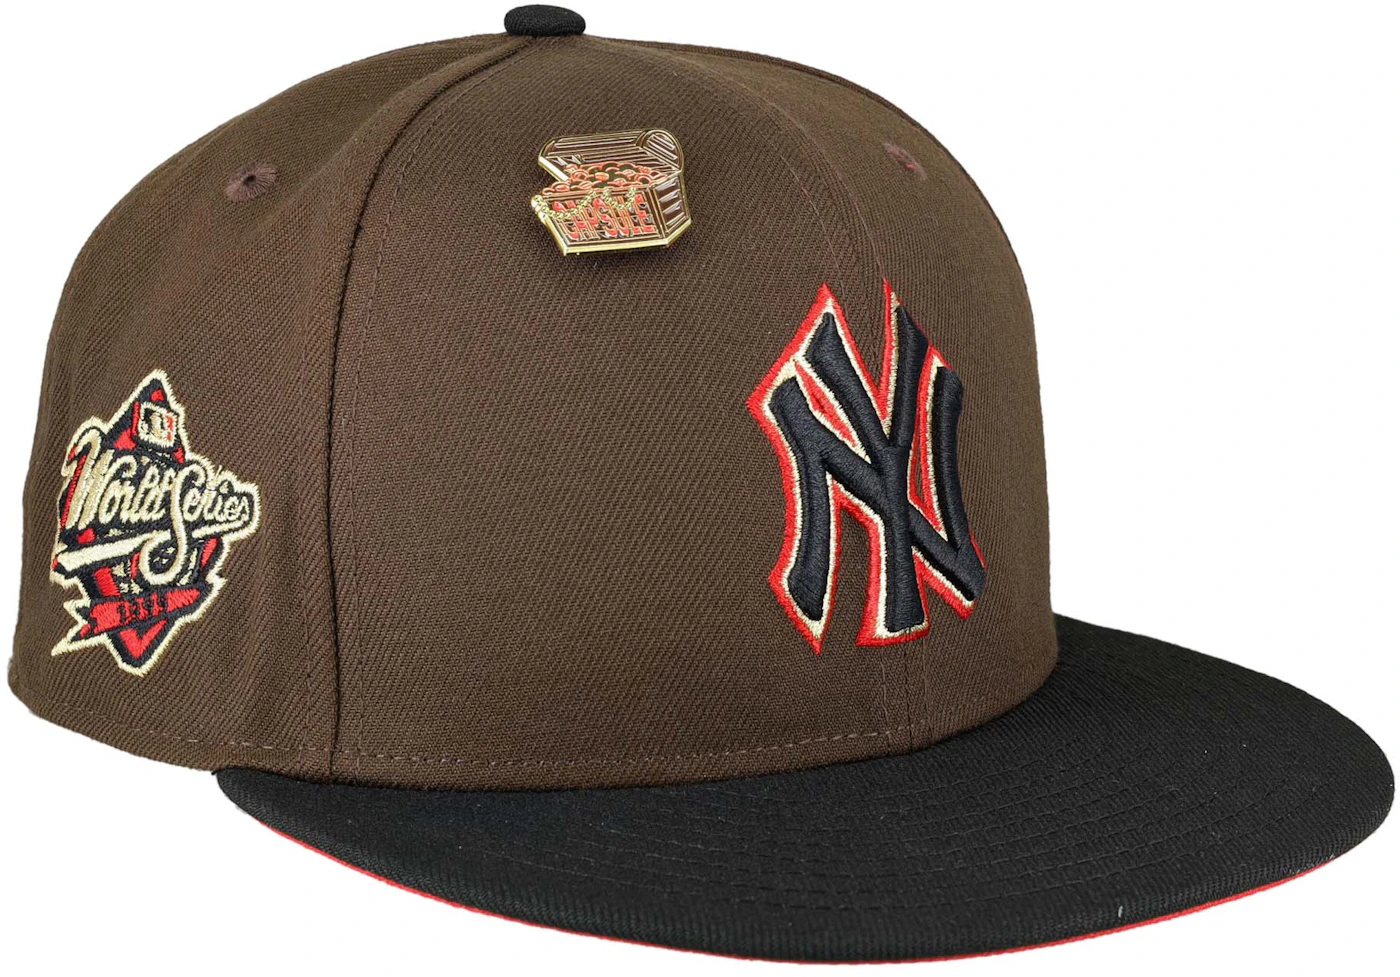 Leather New York Yankees Hat MLB New Era Fitted BLACK BROWN Cap